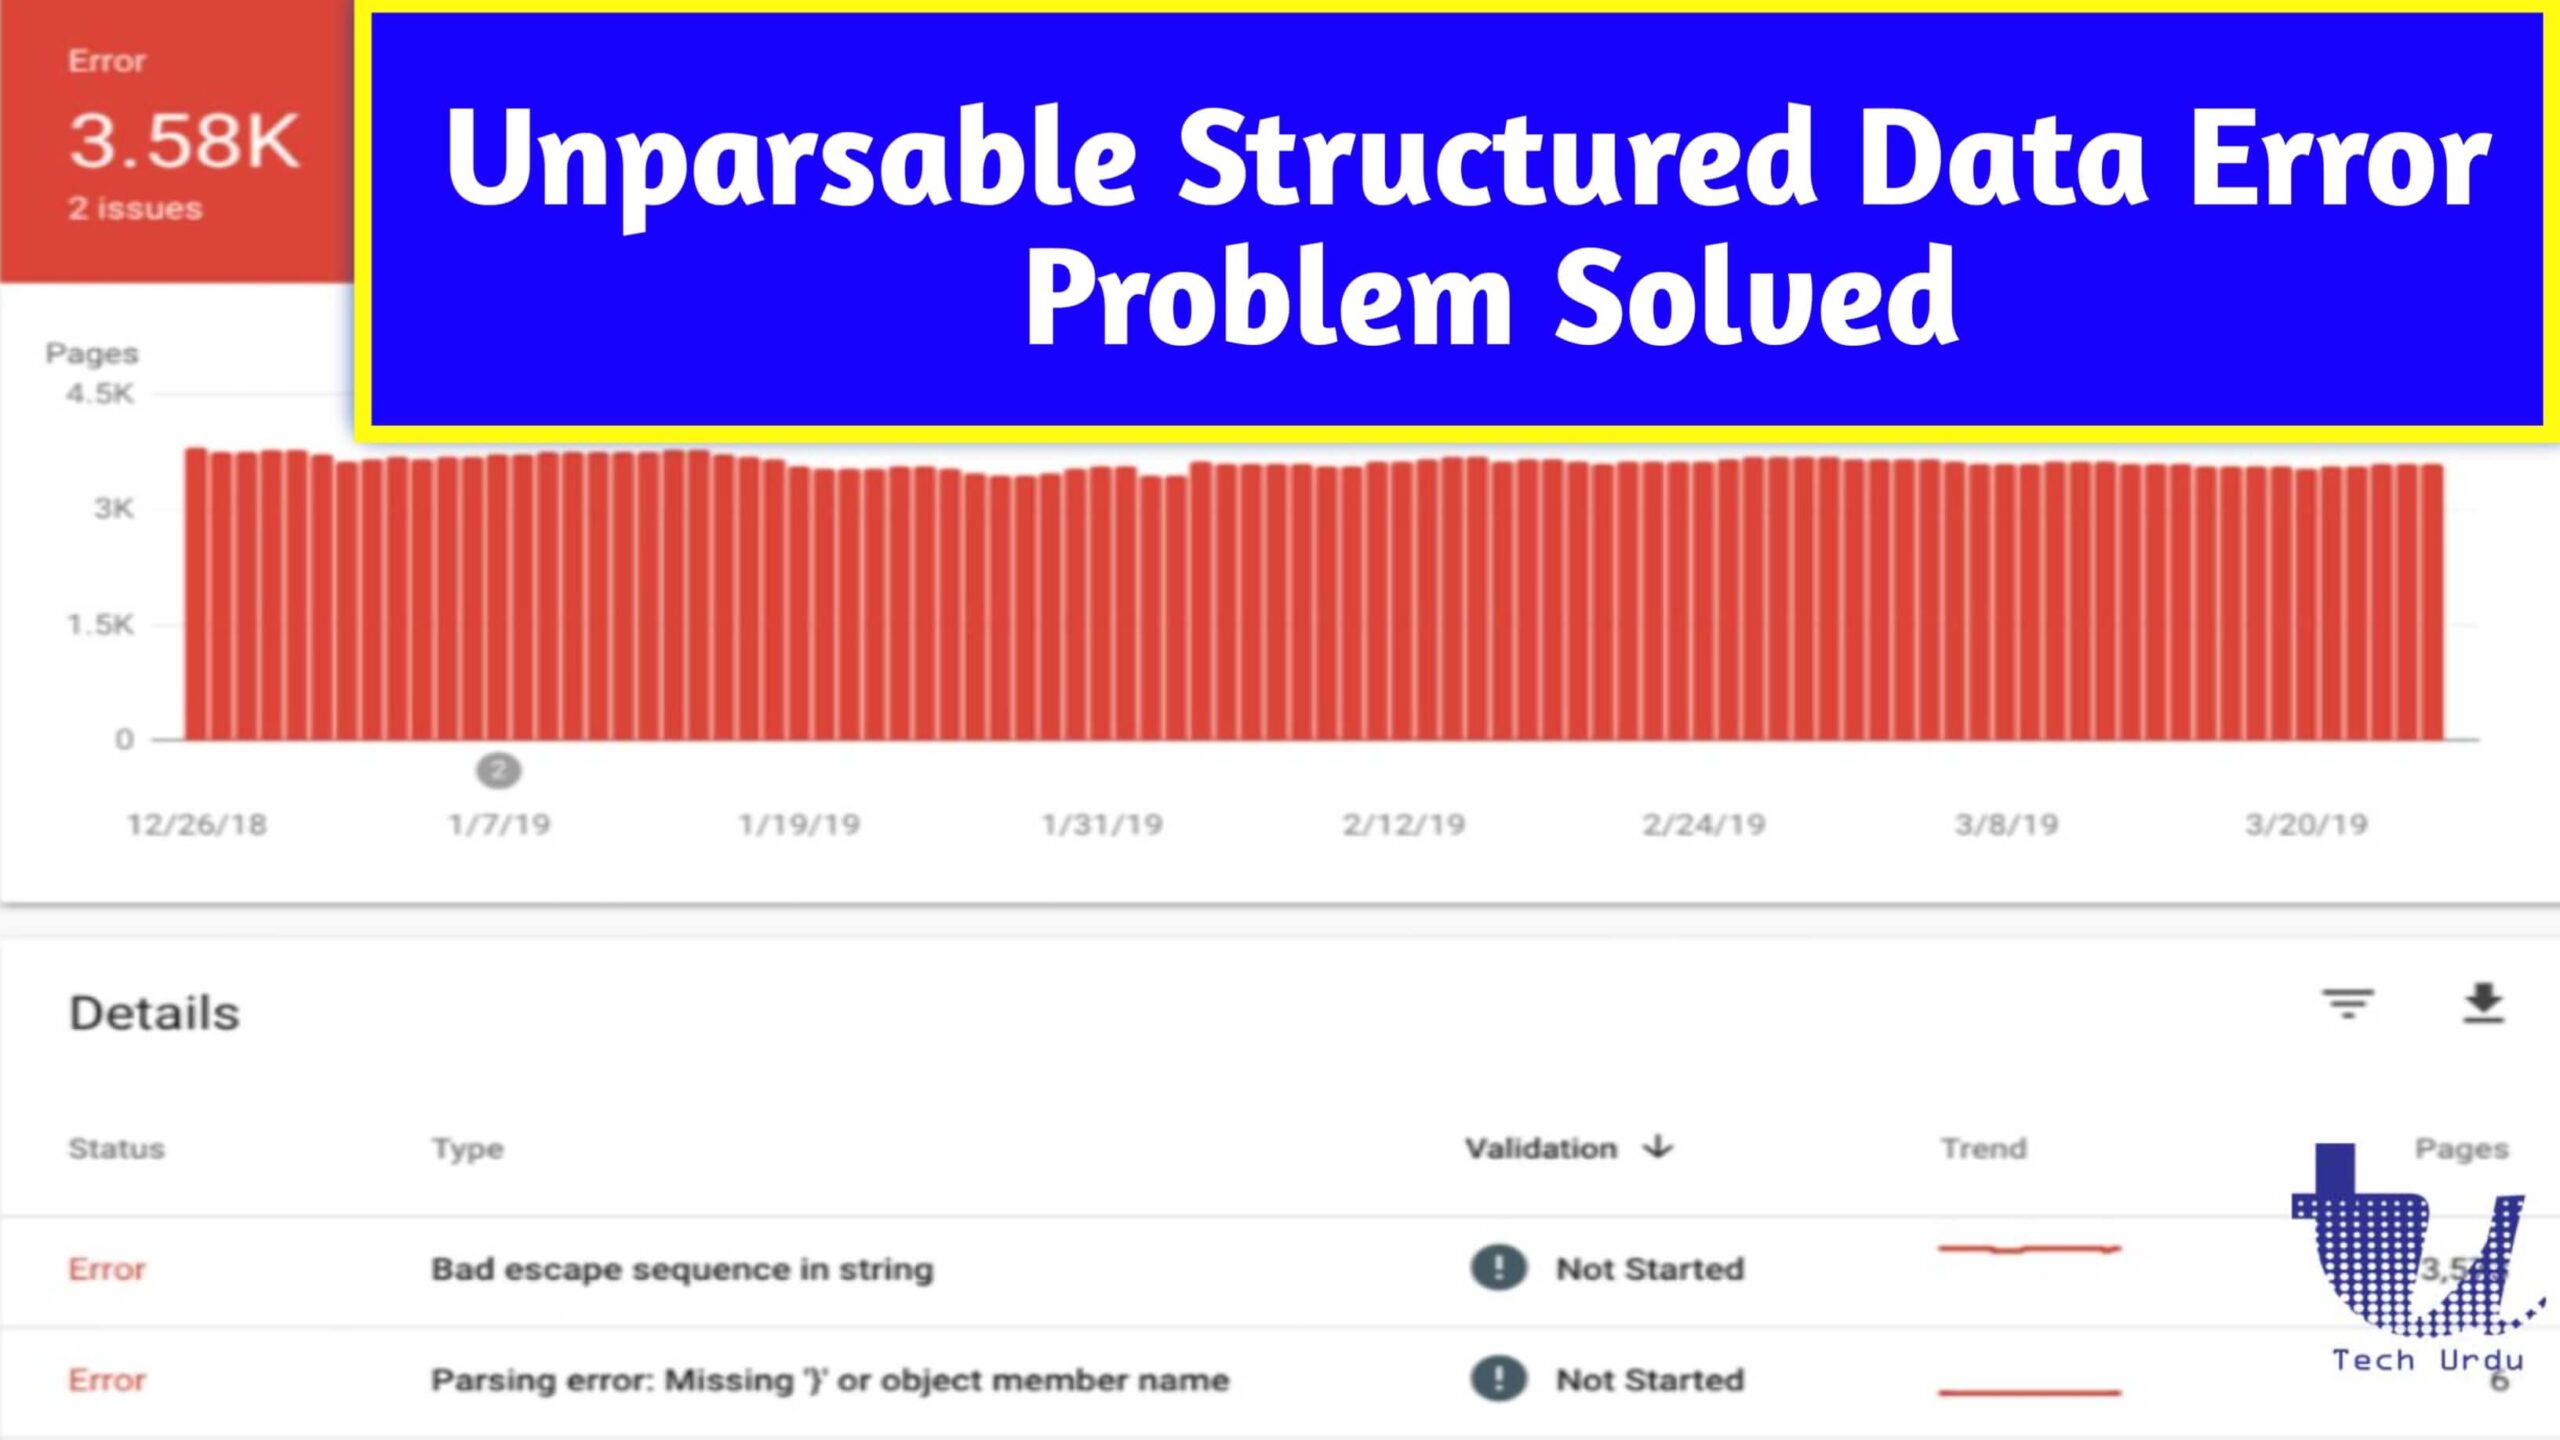 Unparsable Structured Data Issues Detected